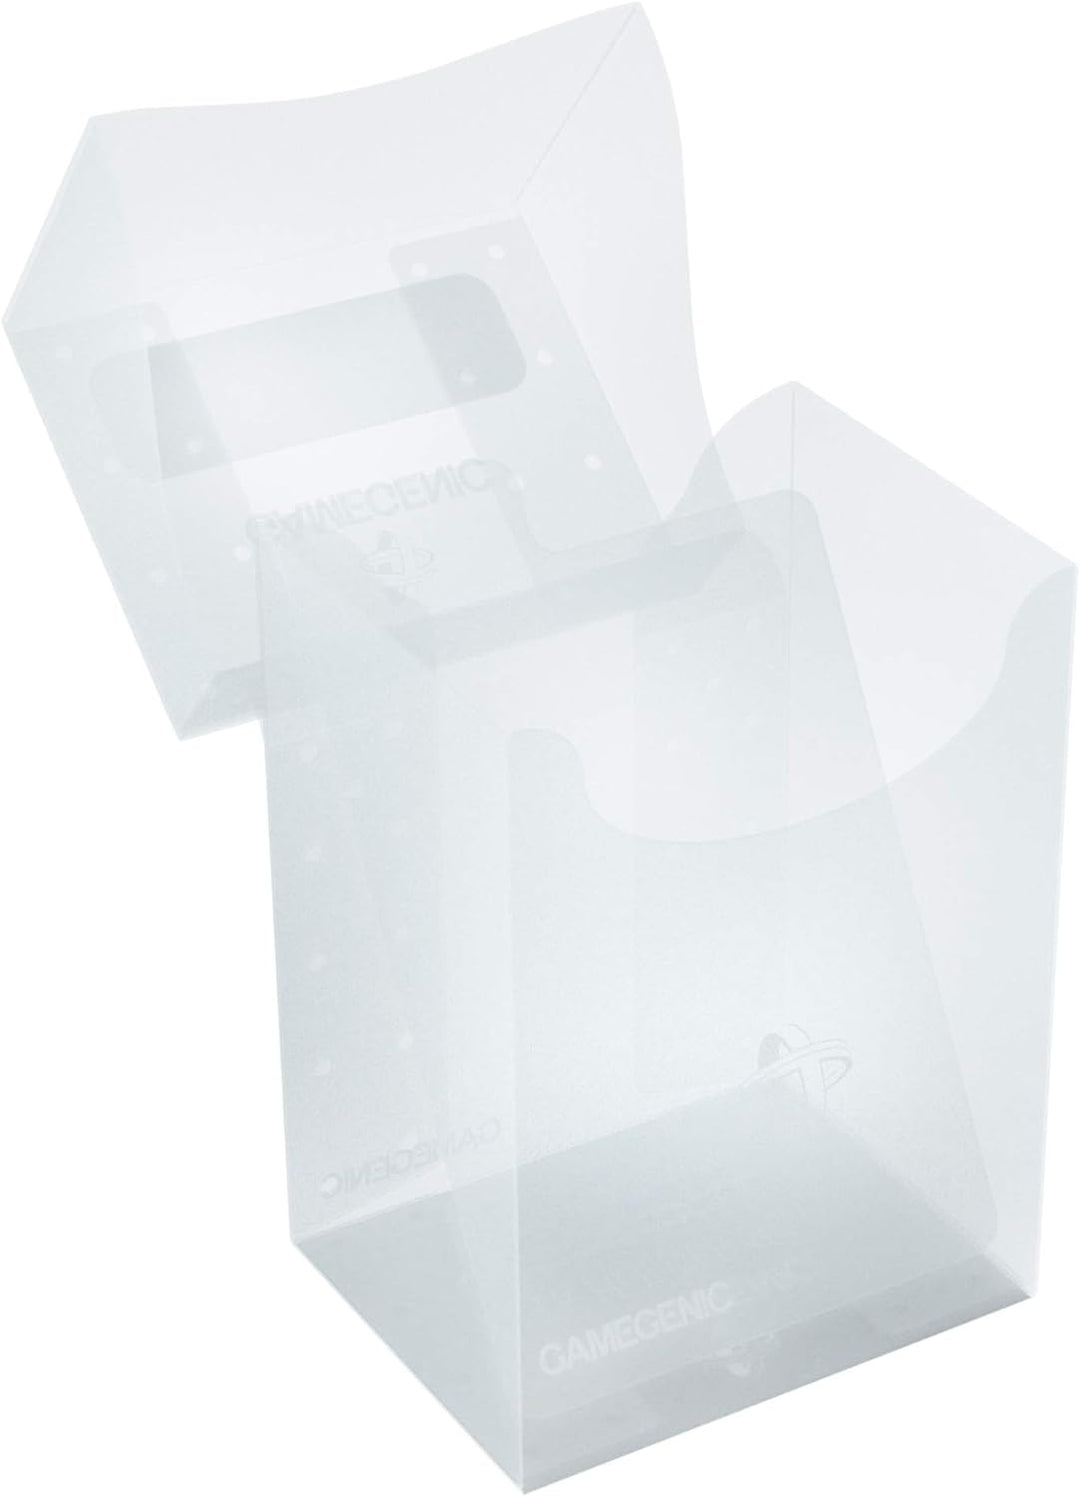 Gamegenic 80-Card Deck Holder, Clear